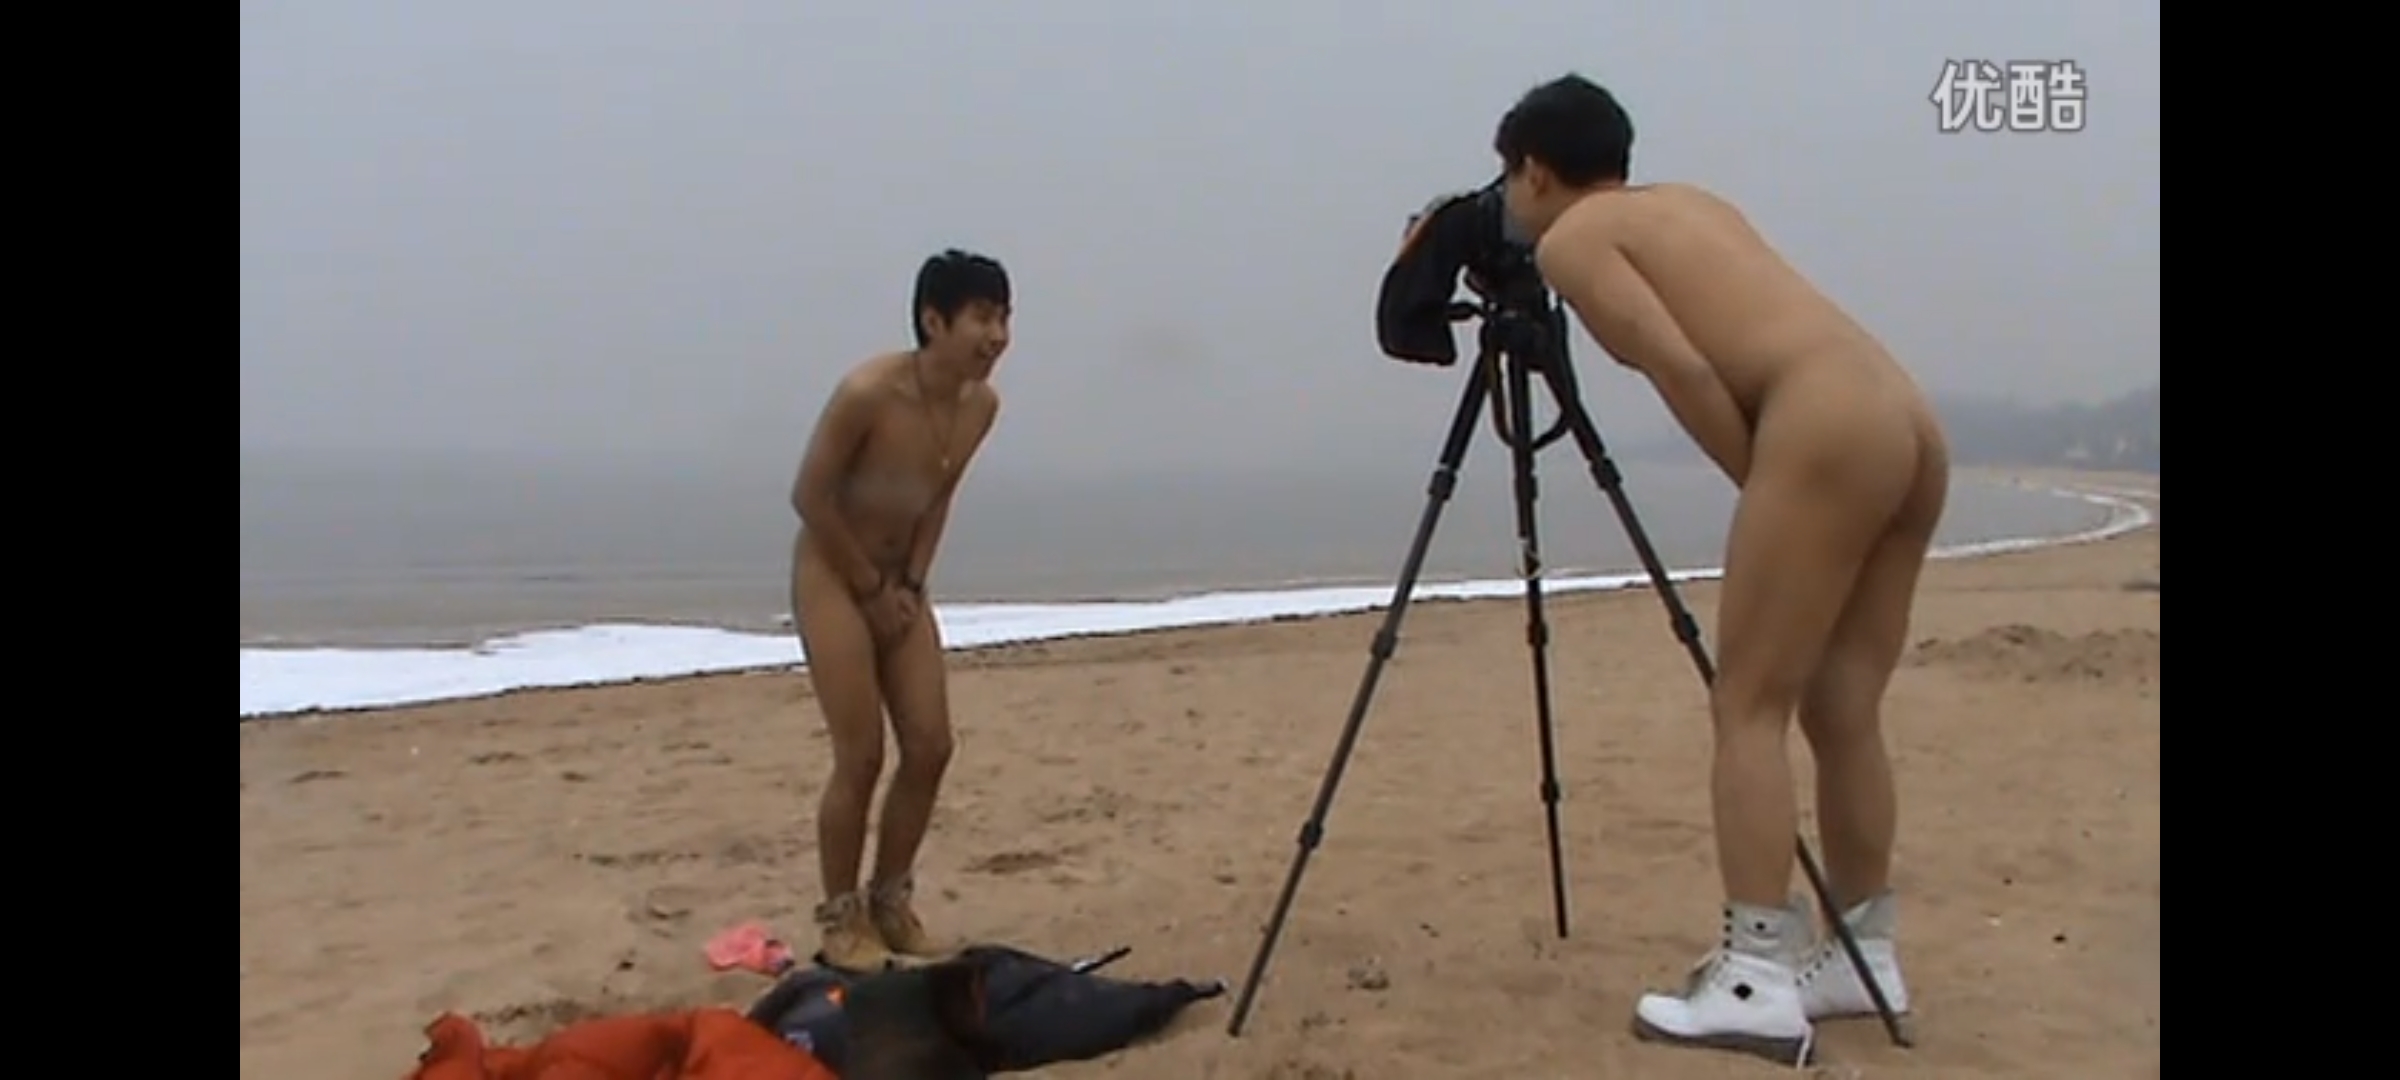 Two naked Chinese men took photos by the sea in winter